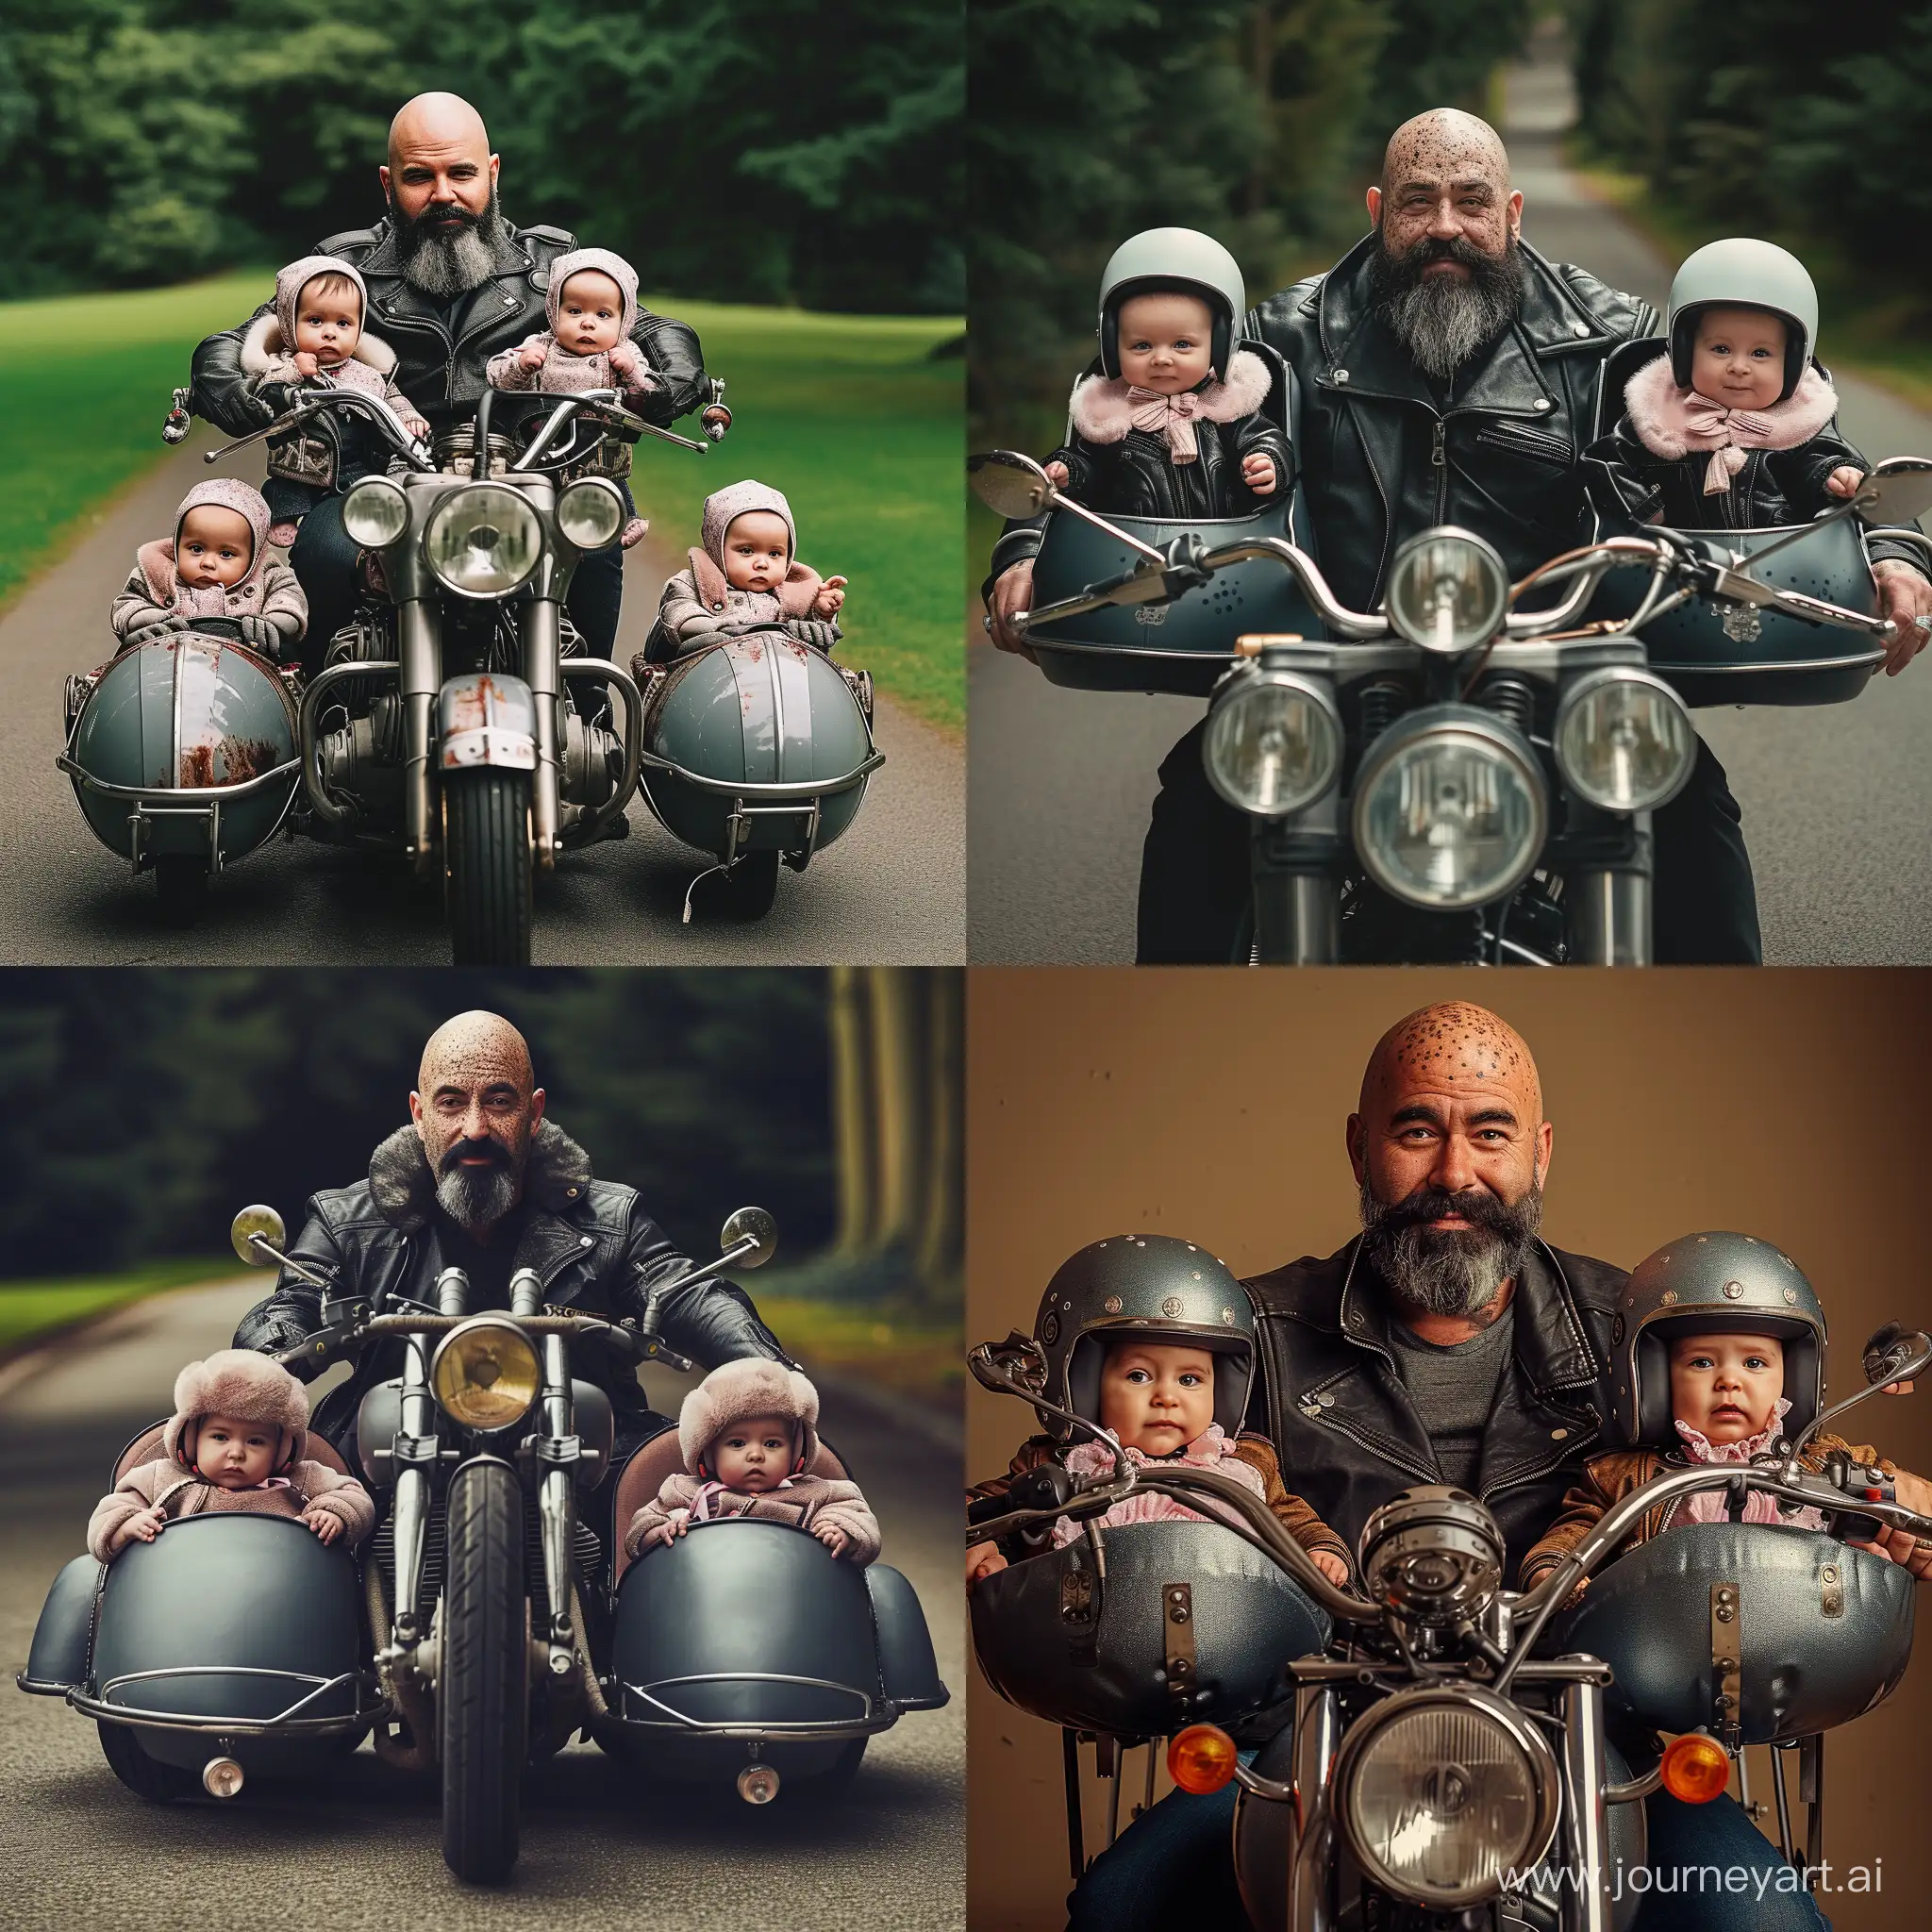 Bald-Father-Riding-Motorcycle-with-Twin-Baby-Girls-in-Leather-Jackets-and-Helmets